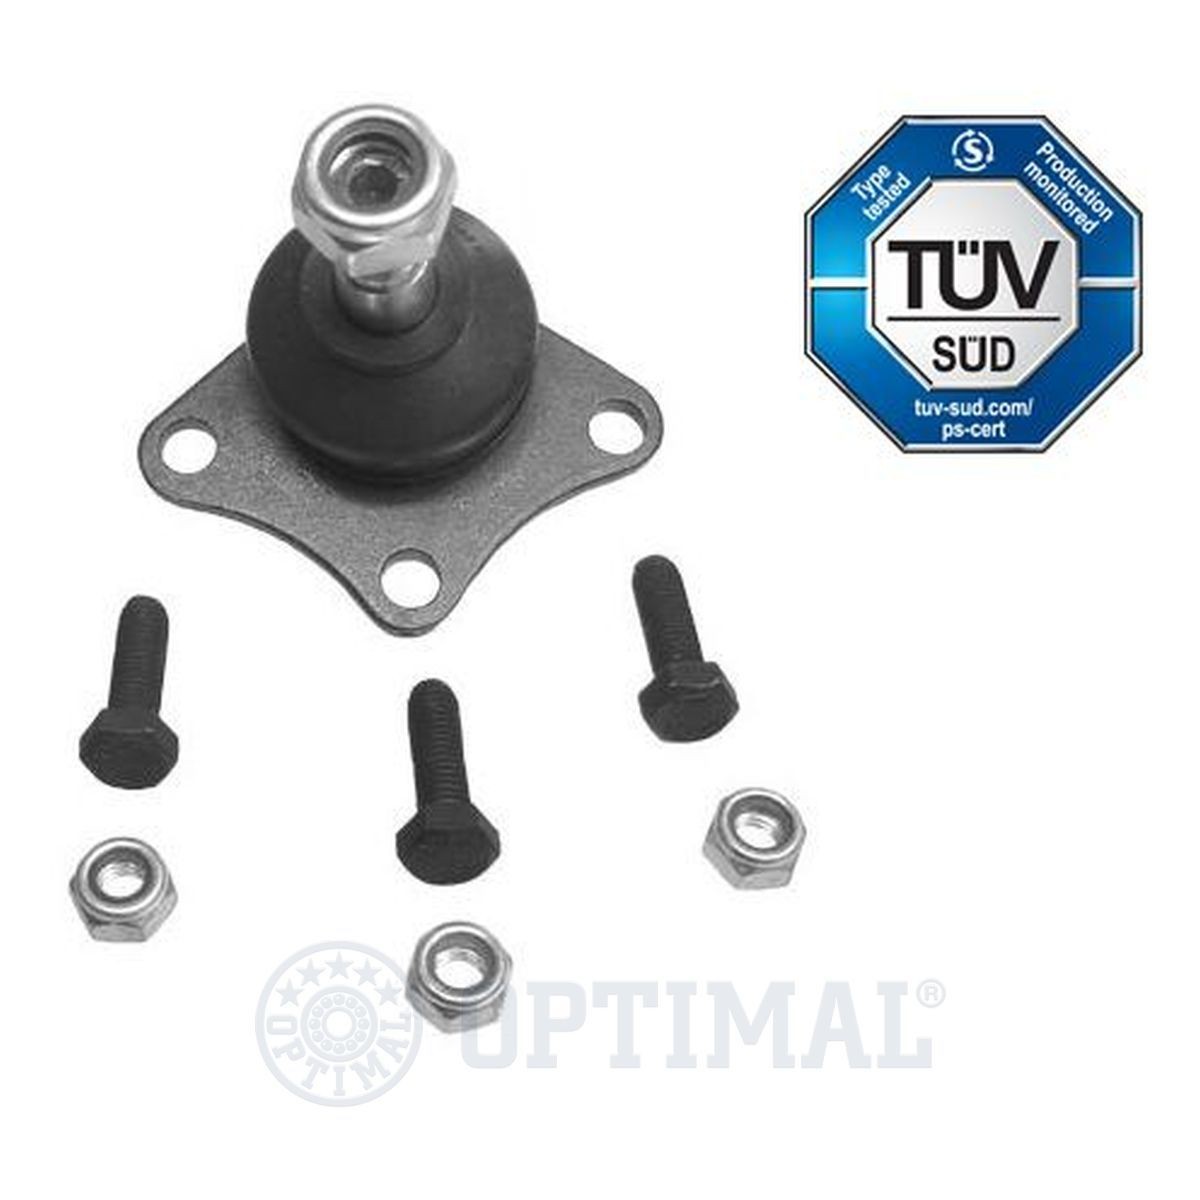 G3-007 OPTIMAL Suspension ball joint ALFA ROMEO Front Axle Left, Front Axle Right, with accessories, 13mm, M12 x 1,25 RHT Mmm